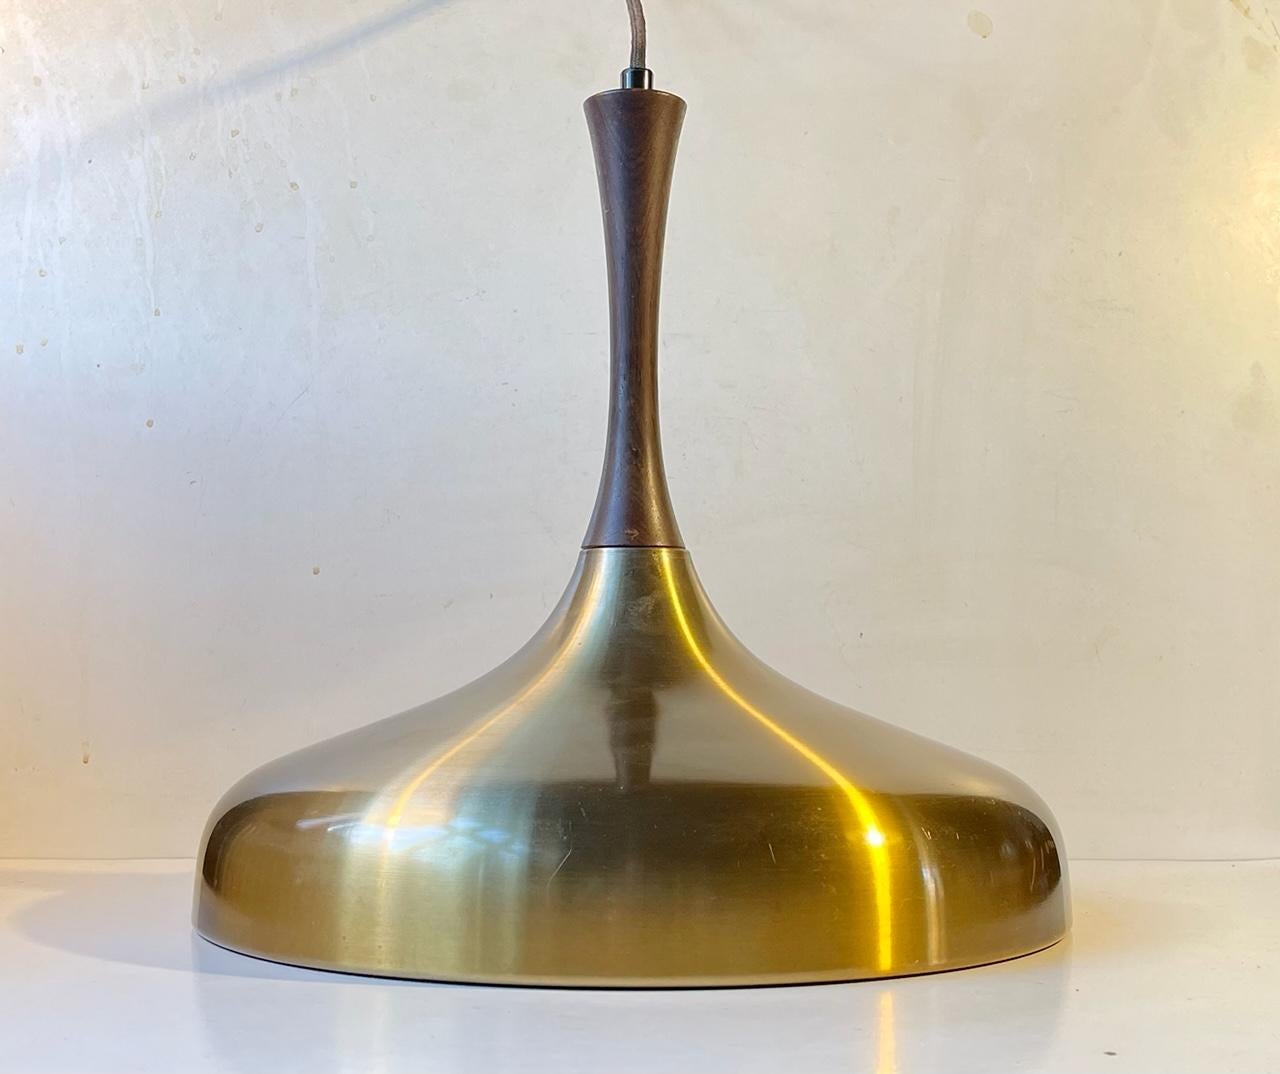 A rare ceiling pendant light composed of an organically shaped brass alloy aluminum shade set in a stylish elongated dark solid wooden top. Designed by Danish Ejnar B. Mielby during the late 1960s and manufactured by Lyfa in the early 1970s.